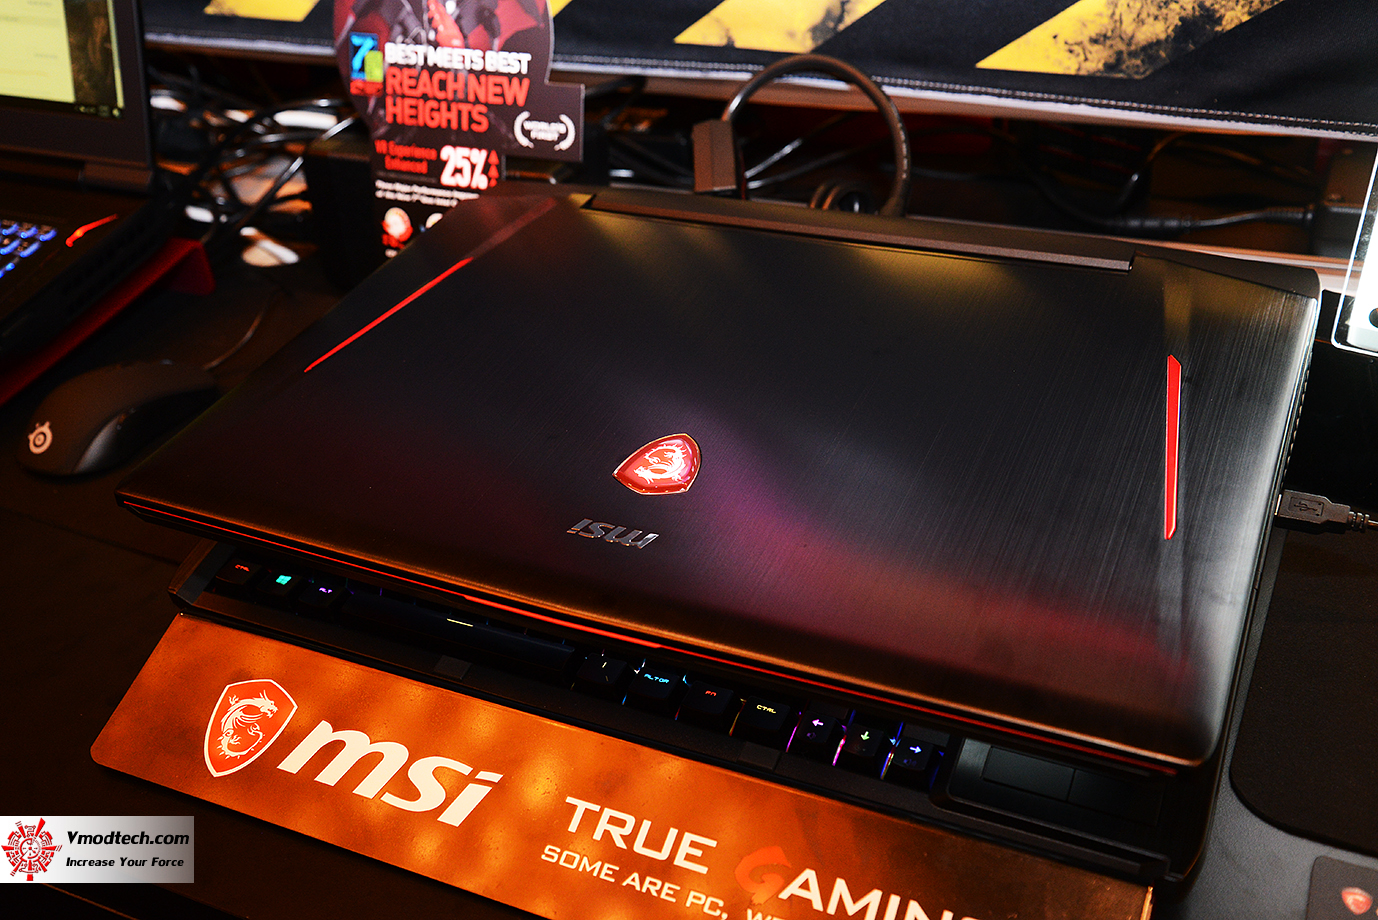 dsc 1505 MSI GAMING NOTEBOOK CES2017 LAS VEGAS PREVIEW